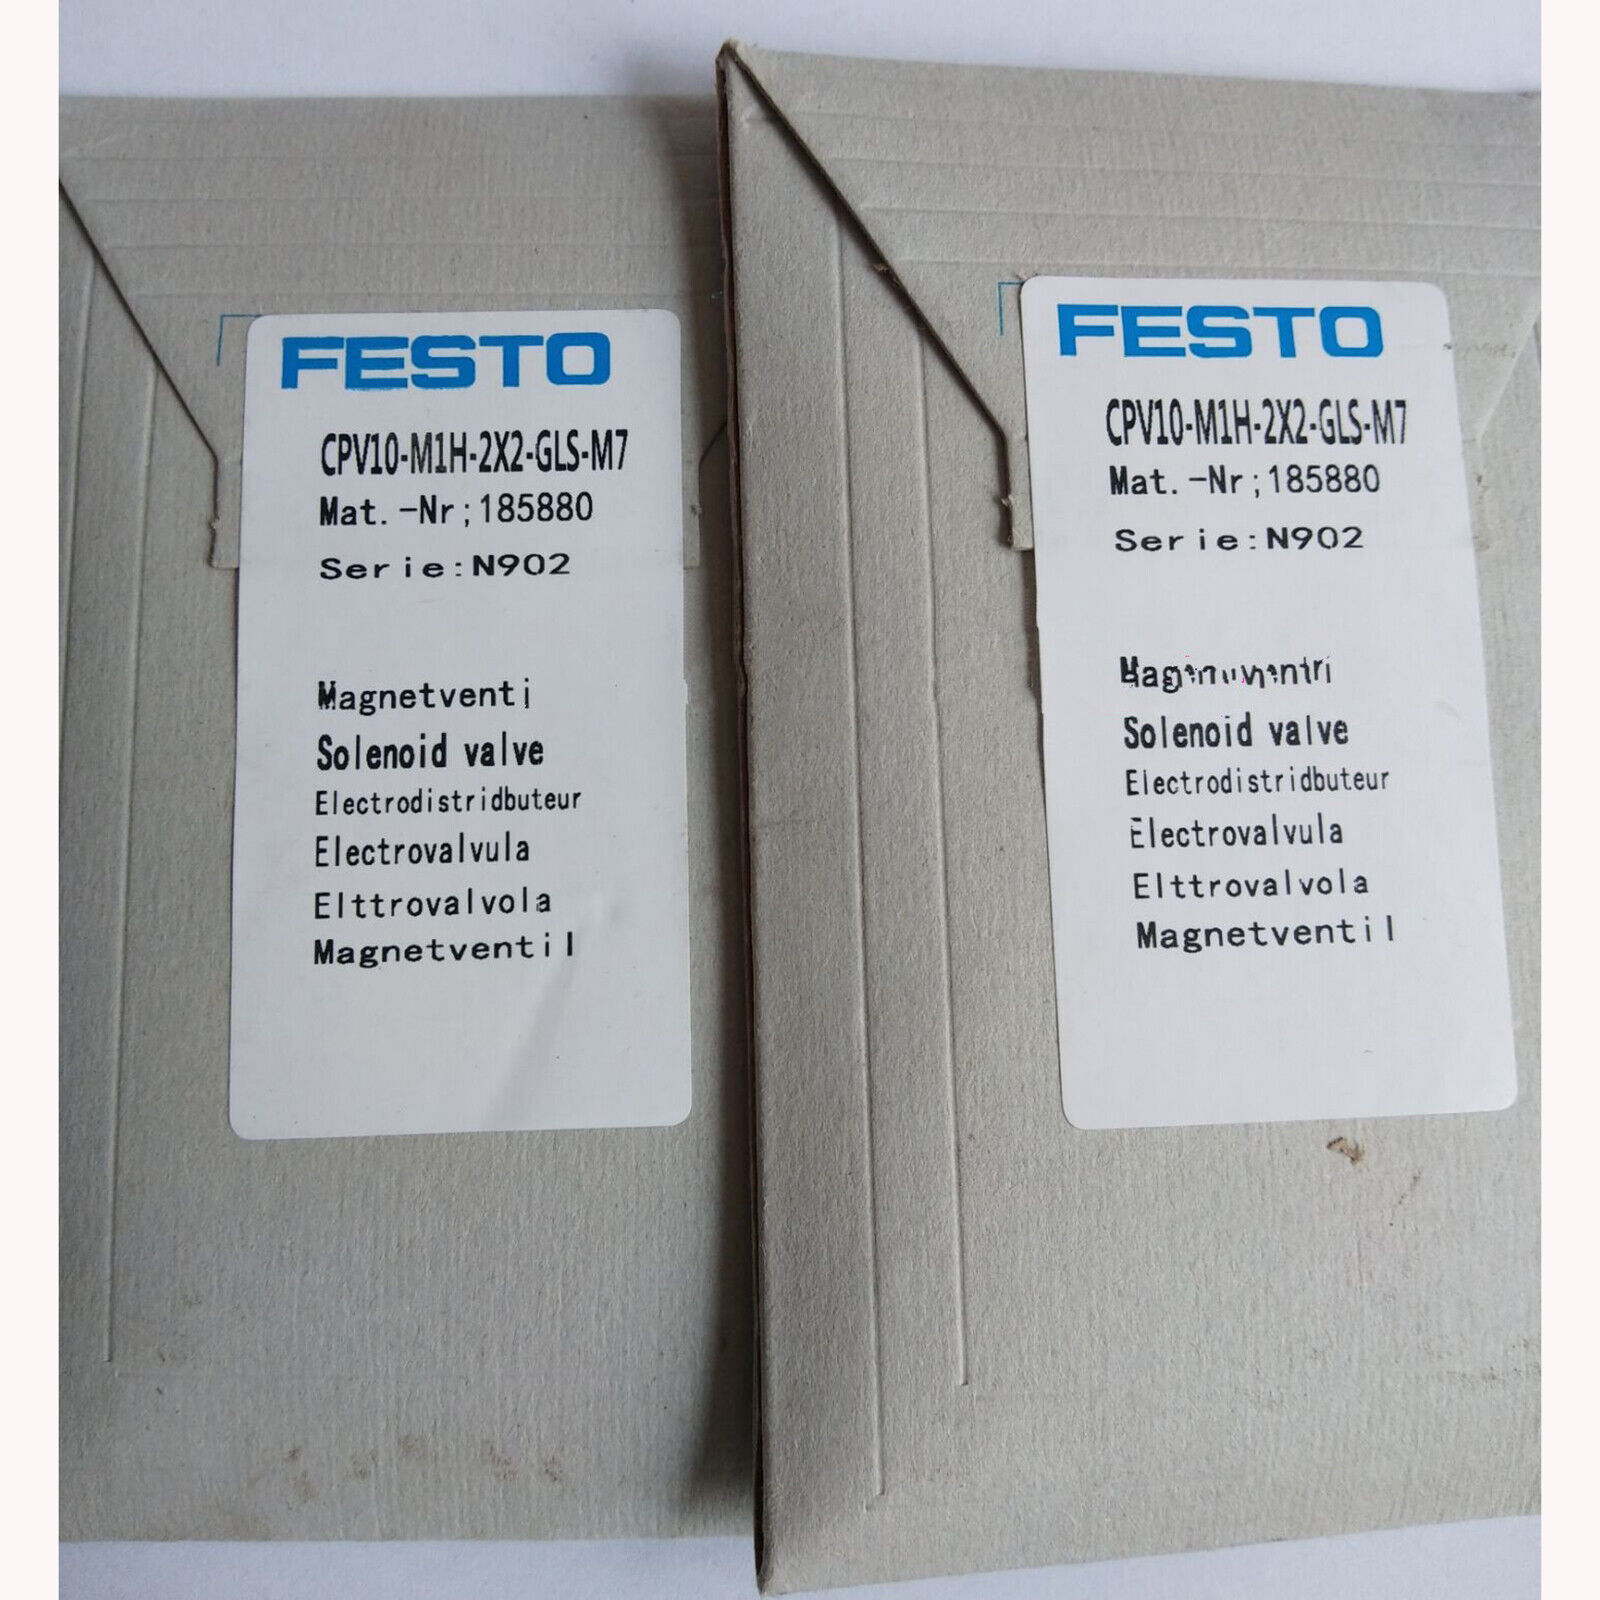 one new FESTO CPV10-M1H-2X2-GLS-M7 185880 solenoid valve Fast Delivery